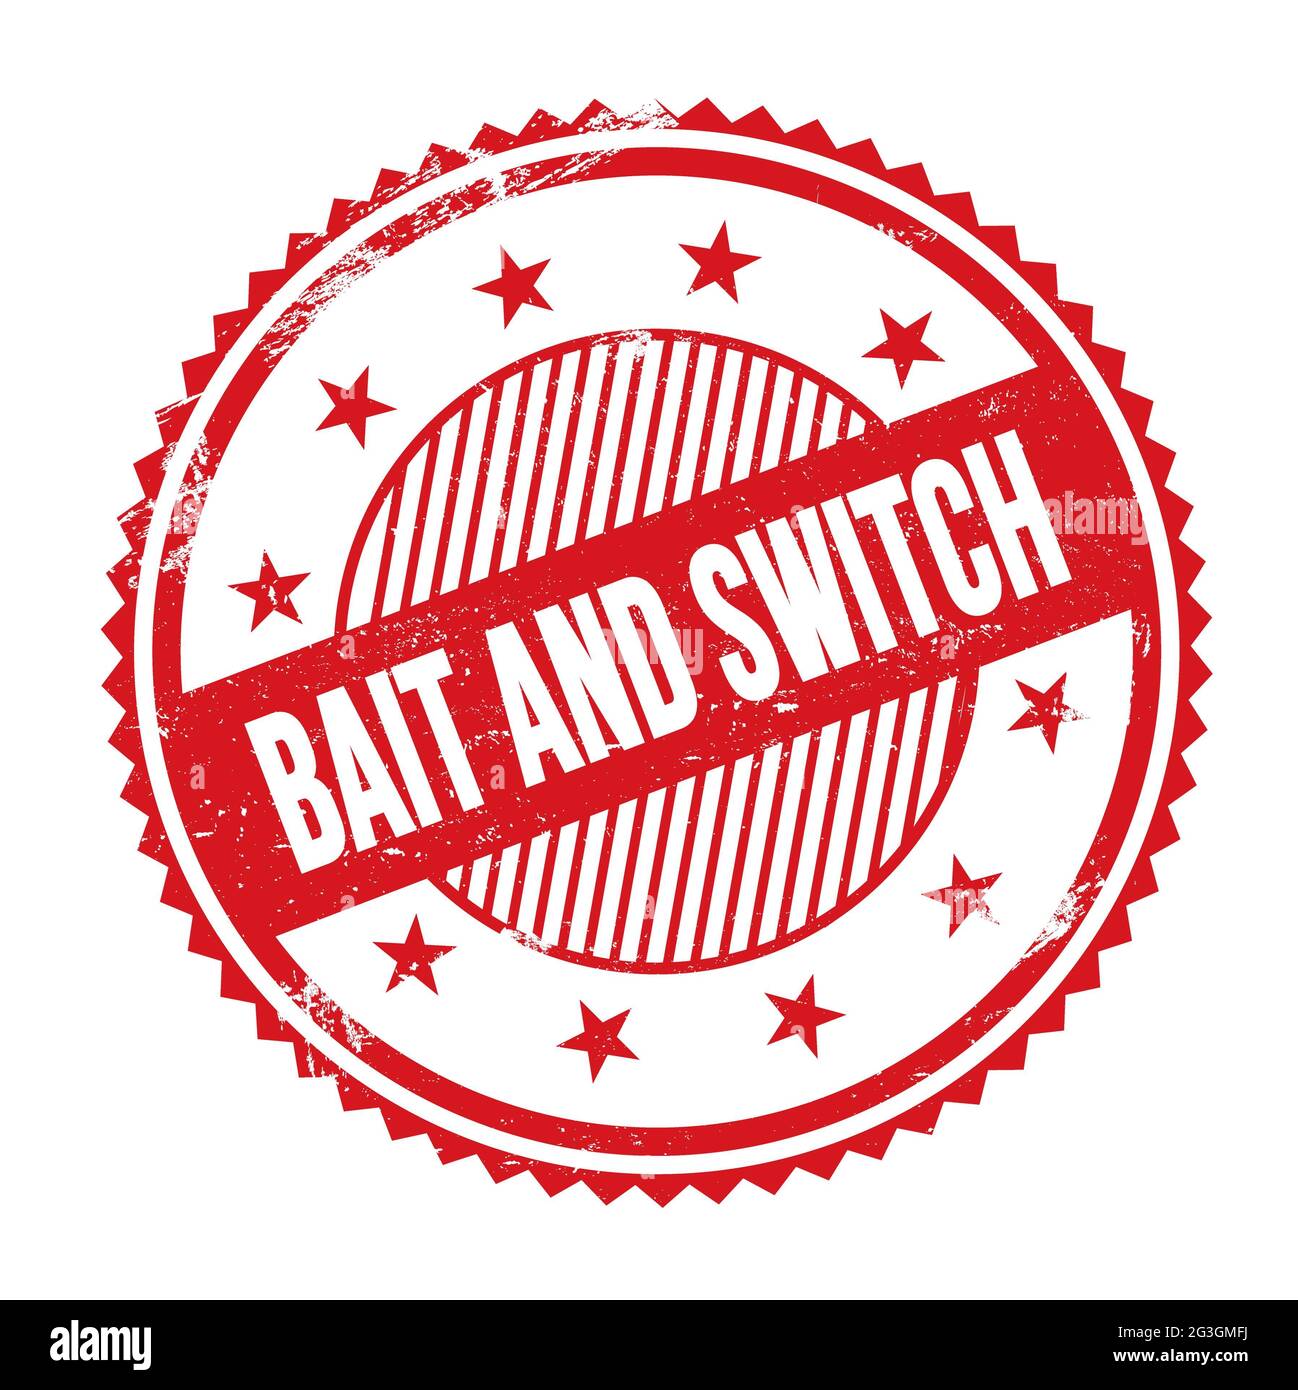 BAIT AND SWITCH text written on red grungy zig zag borders round stamp  Stock Photo - Alamy